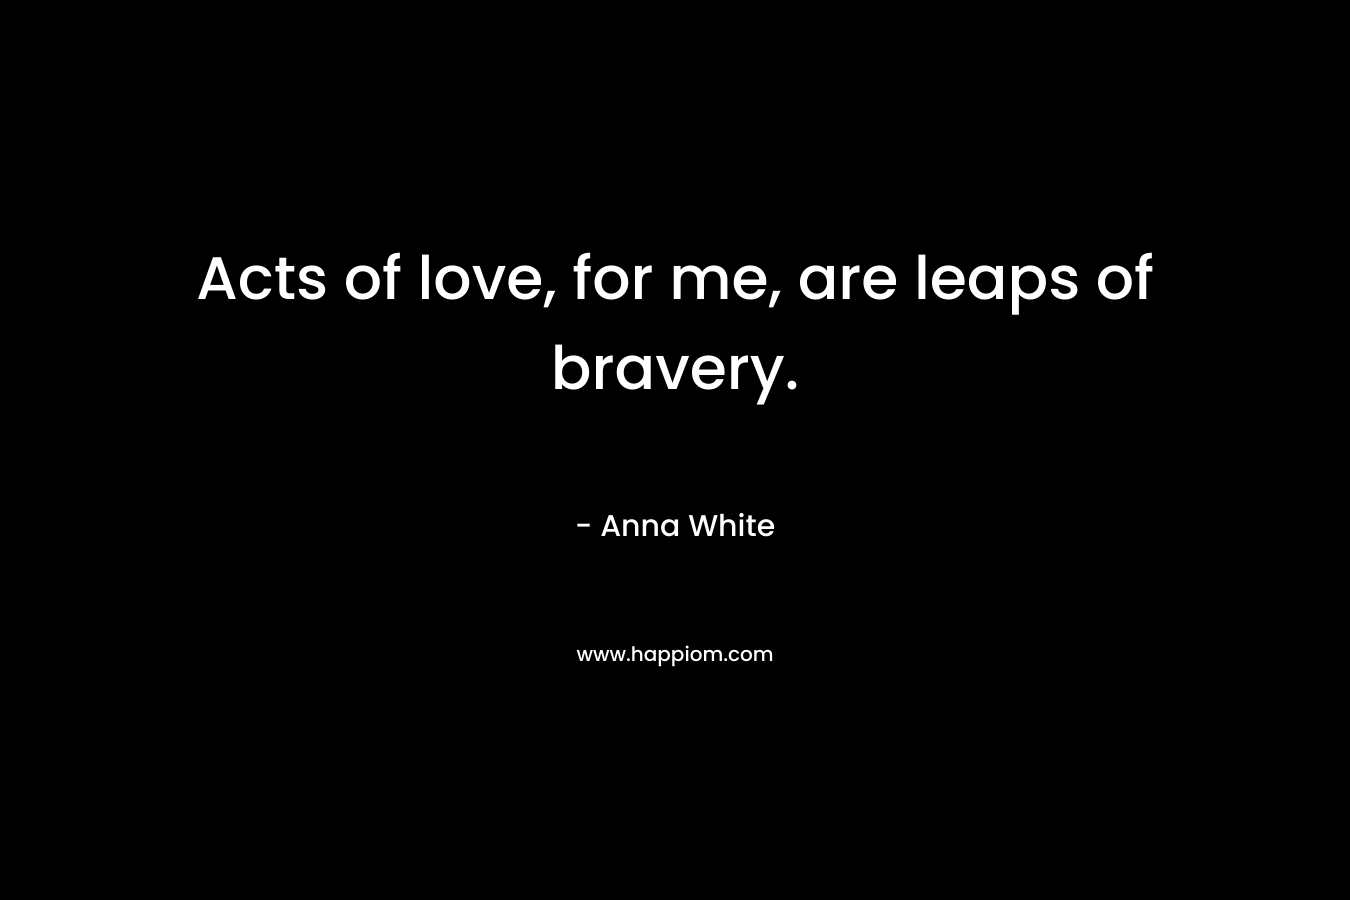 Acts of love, for me, are leaps of bravery.